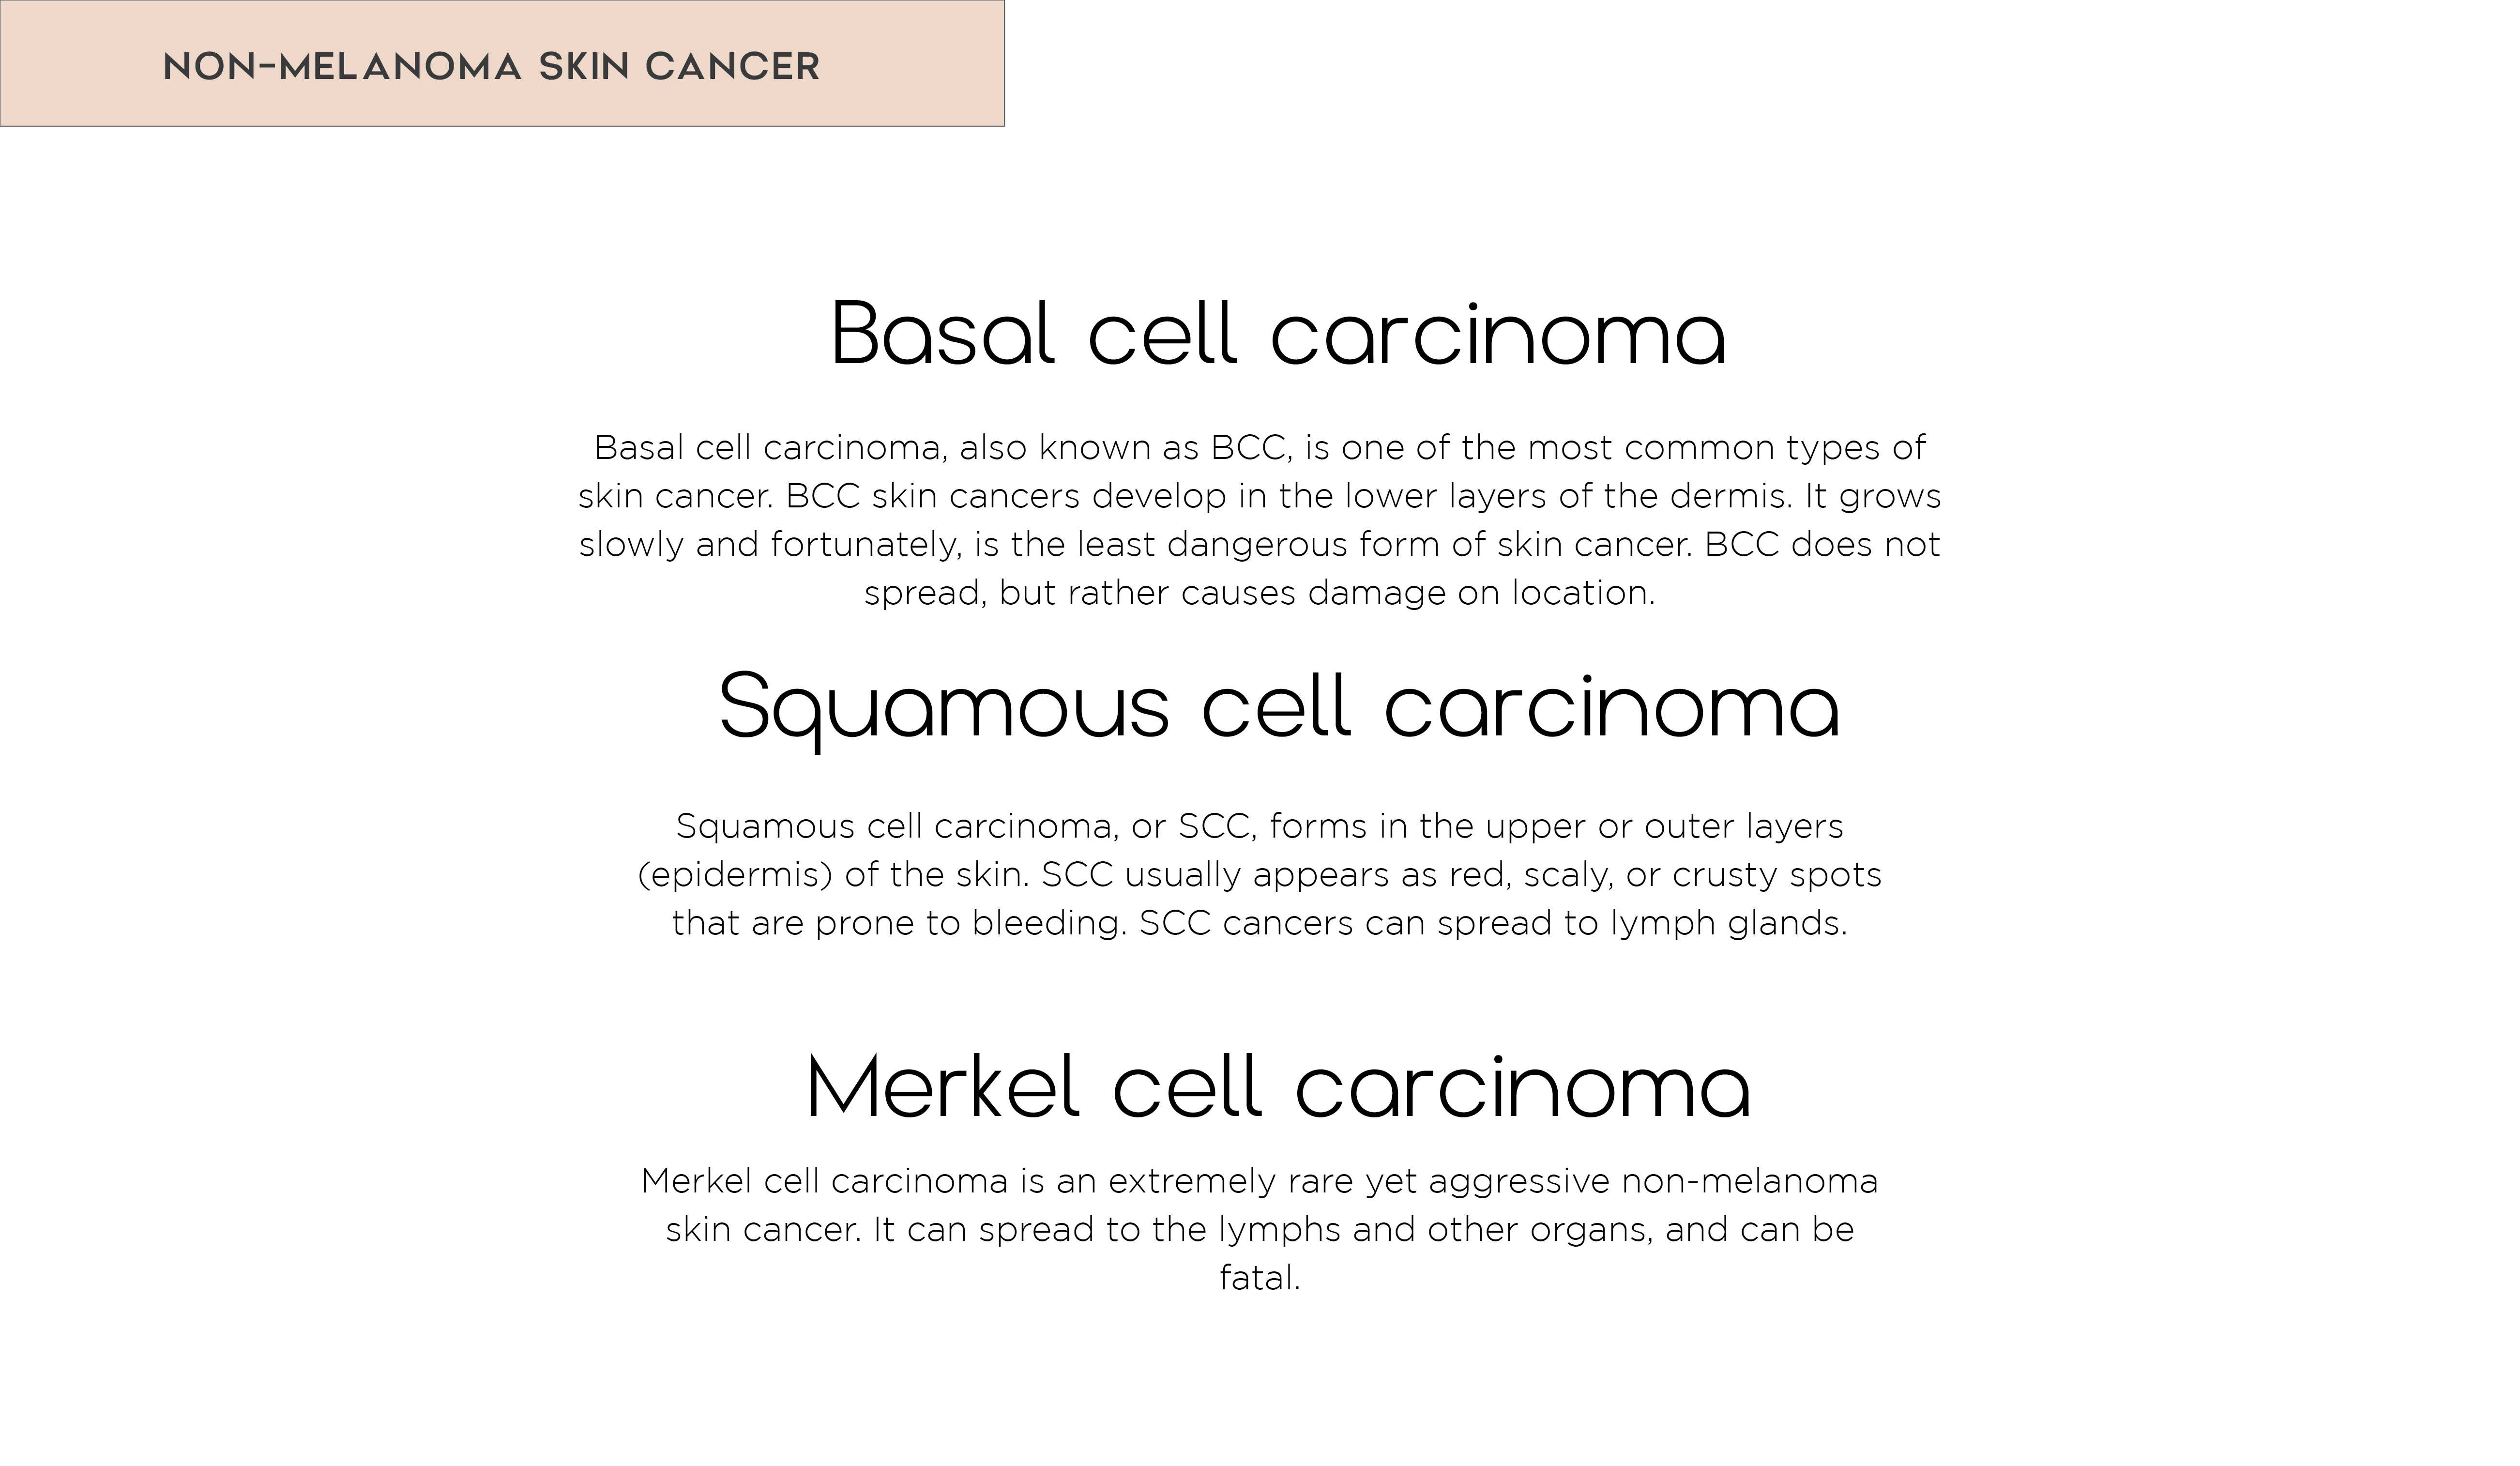 The types of skin cancer